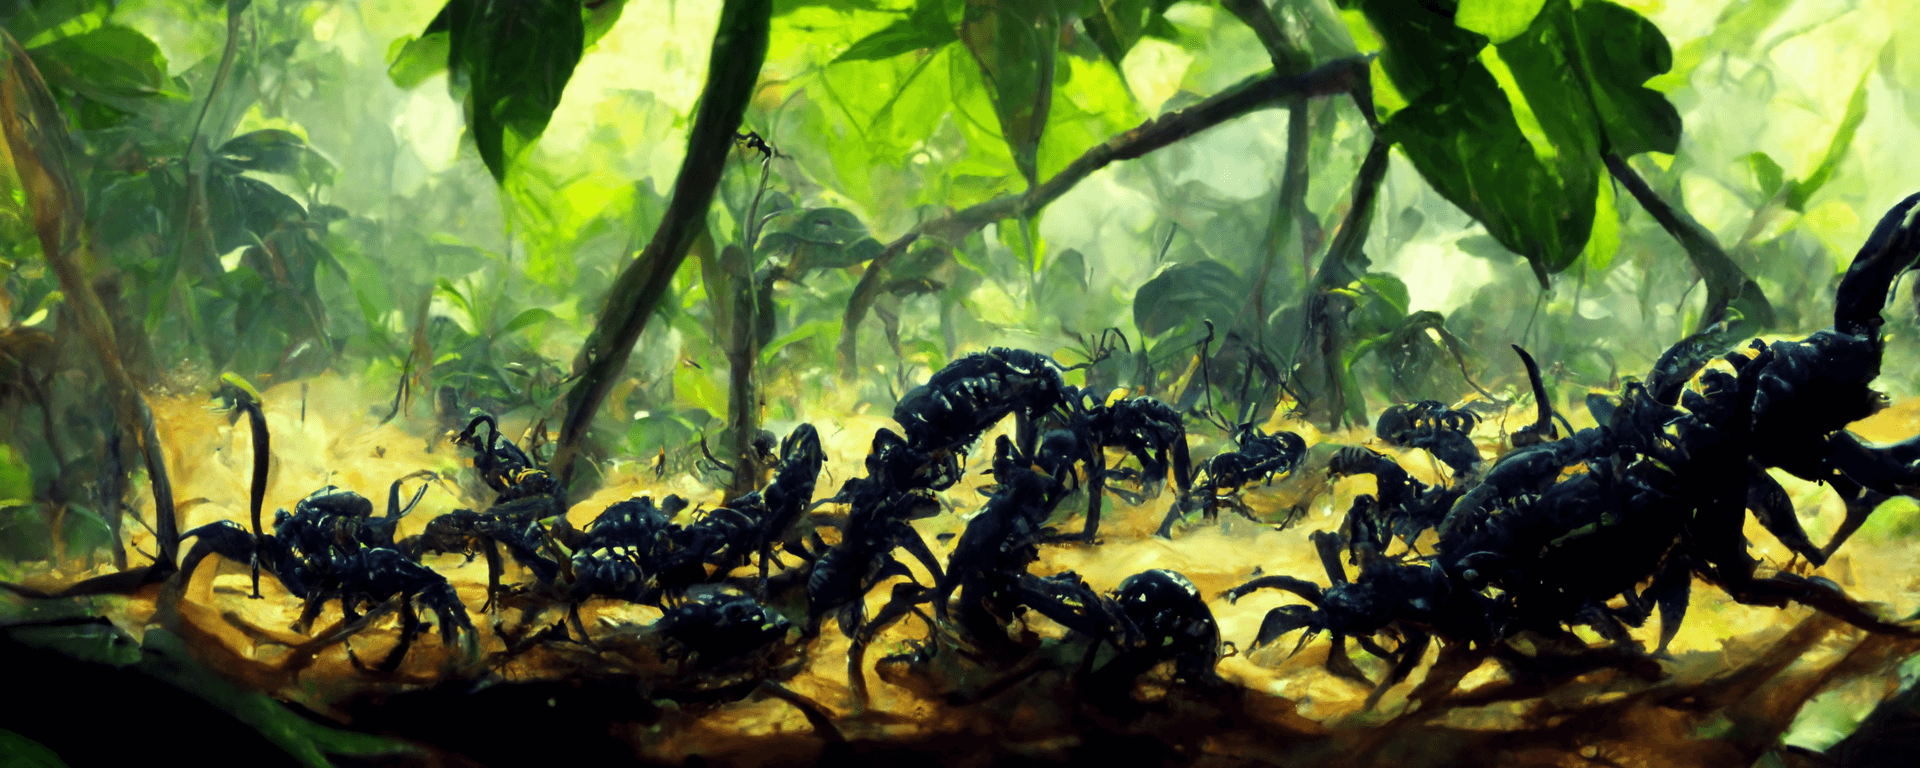 Scorpions fighting in a forest